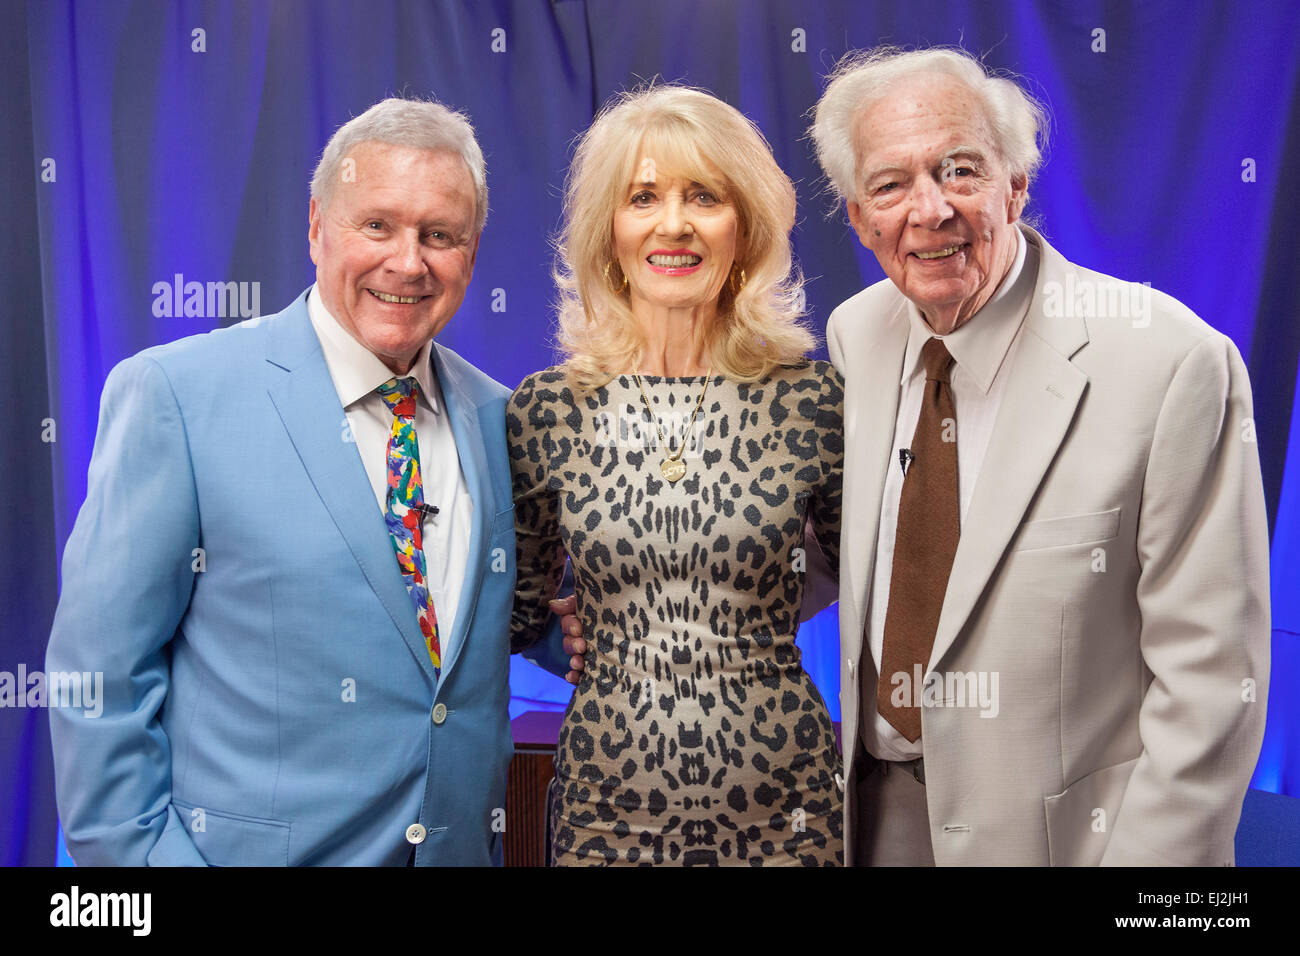 Walsall, West Midlands, UK. 20 March 2015. David Hamilton (L) with English pop singer Julie Rogers (C) and British television producer Johnnie Hamp (R) at a recording of ‘The David Hamilton Show’ for Big Centre TV. Hosted by presenter and broadcaster ‘Diddy’ David Hamilton the show features famous personalities from across the music and television spectrum. Credit:  John Henshall / Alamy Live News PER0519 Stock Photo